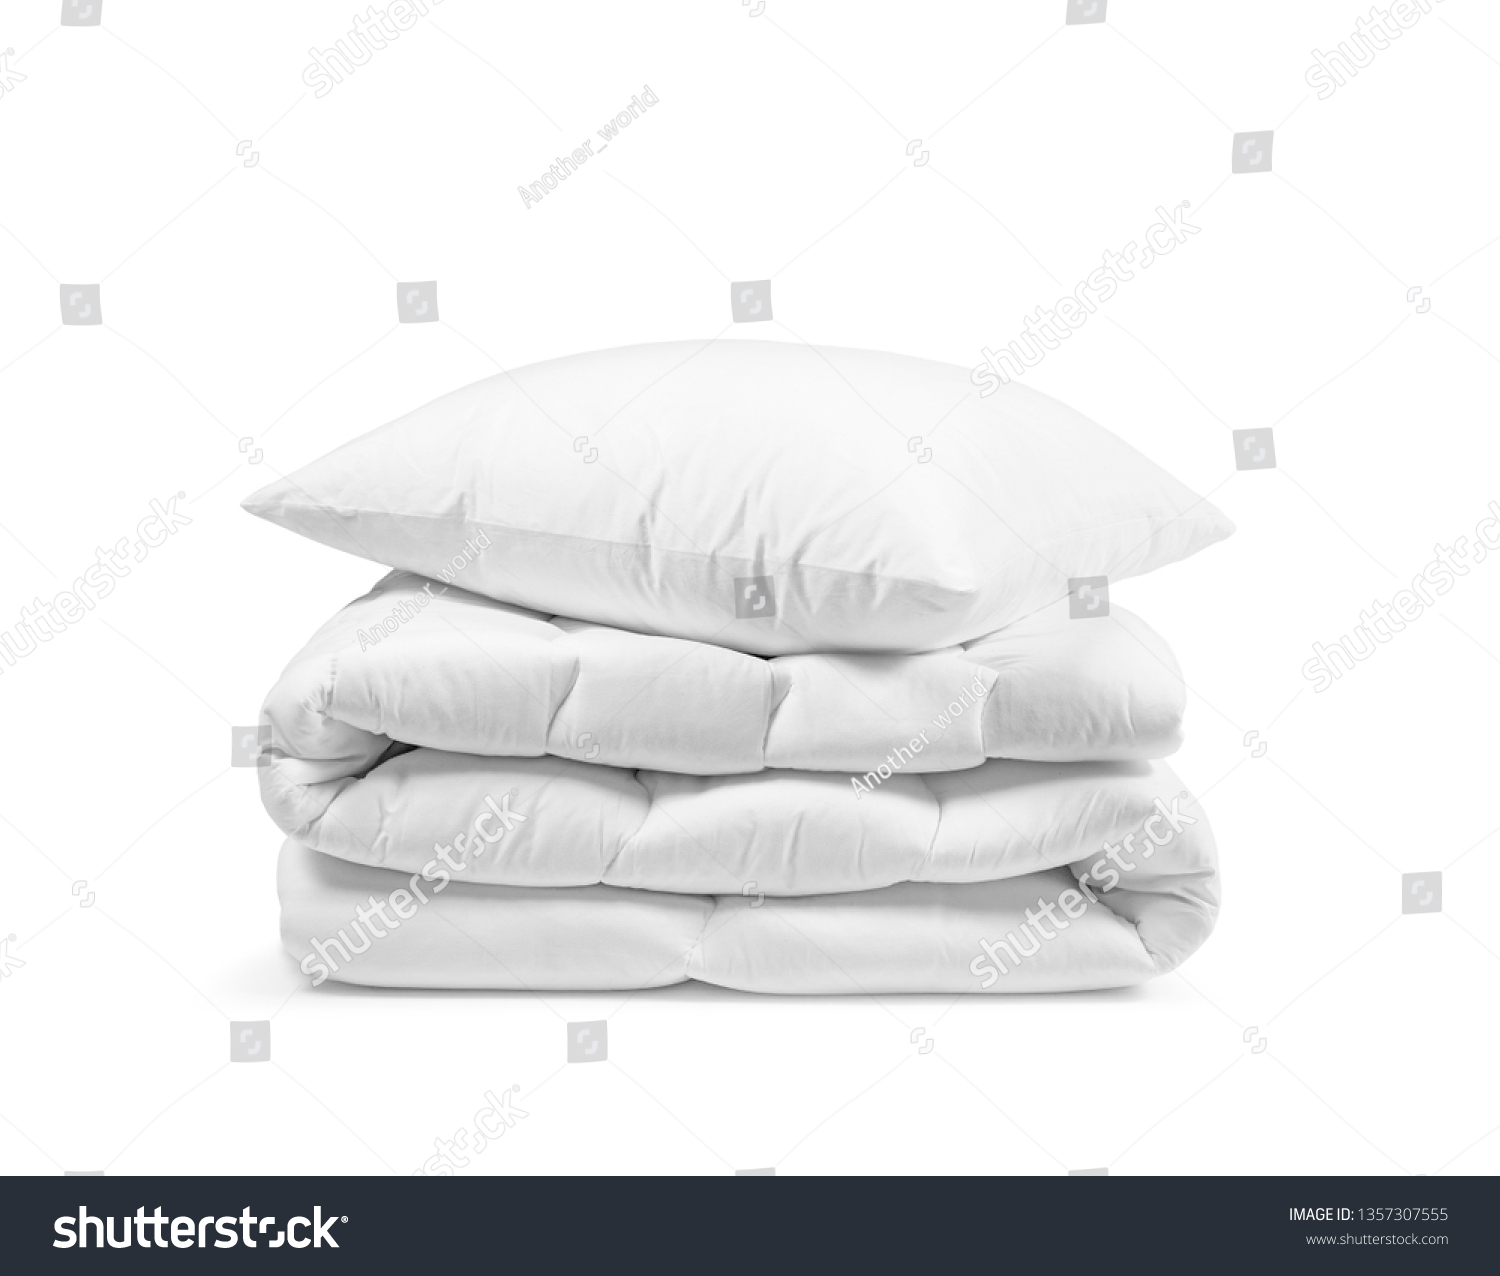 Stack of beddings on the white background, white pillow on the duvet isolated, bedding objects isolated against white background, bedding items catalog illustration, bedding mockup #1357307555